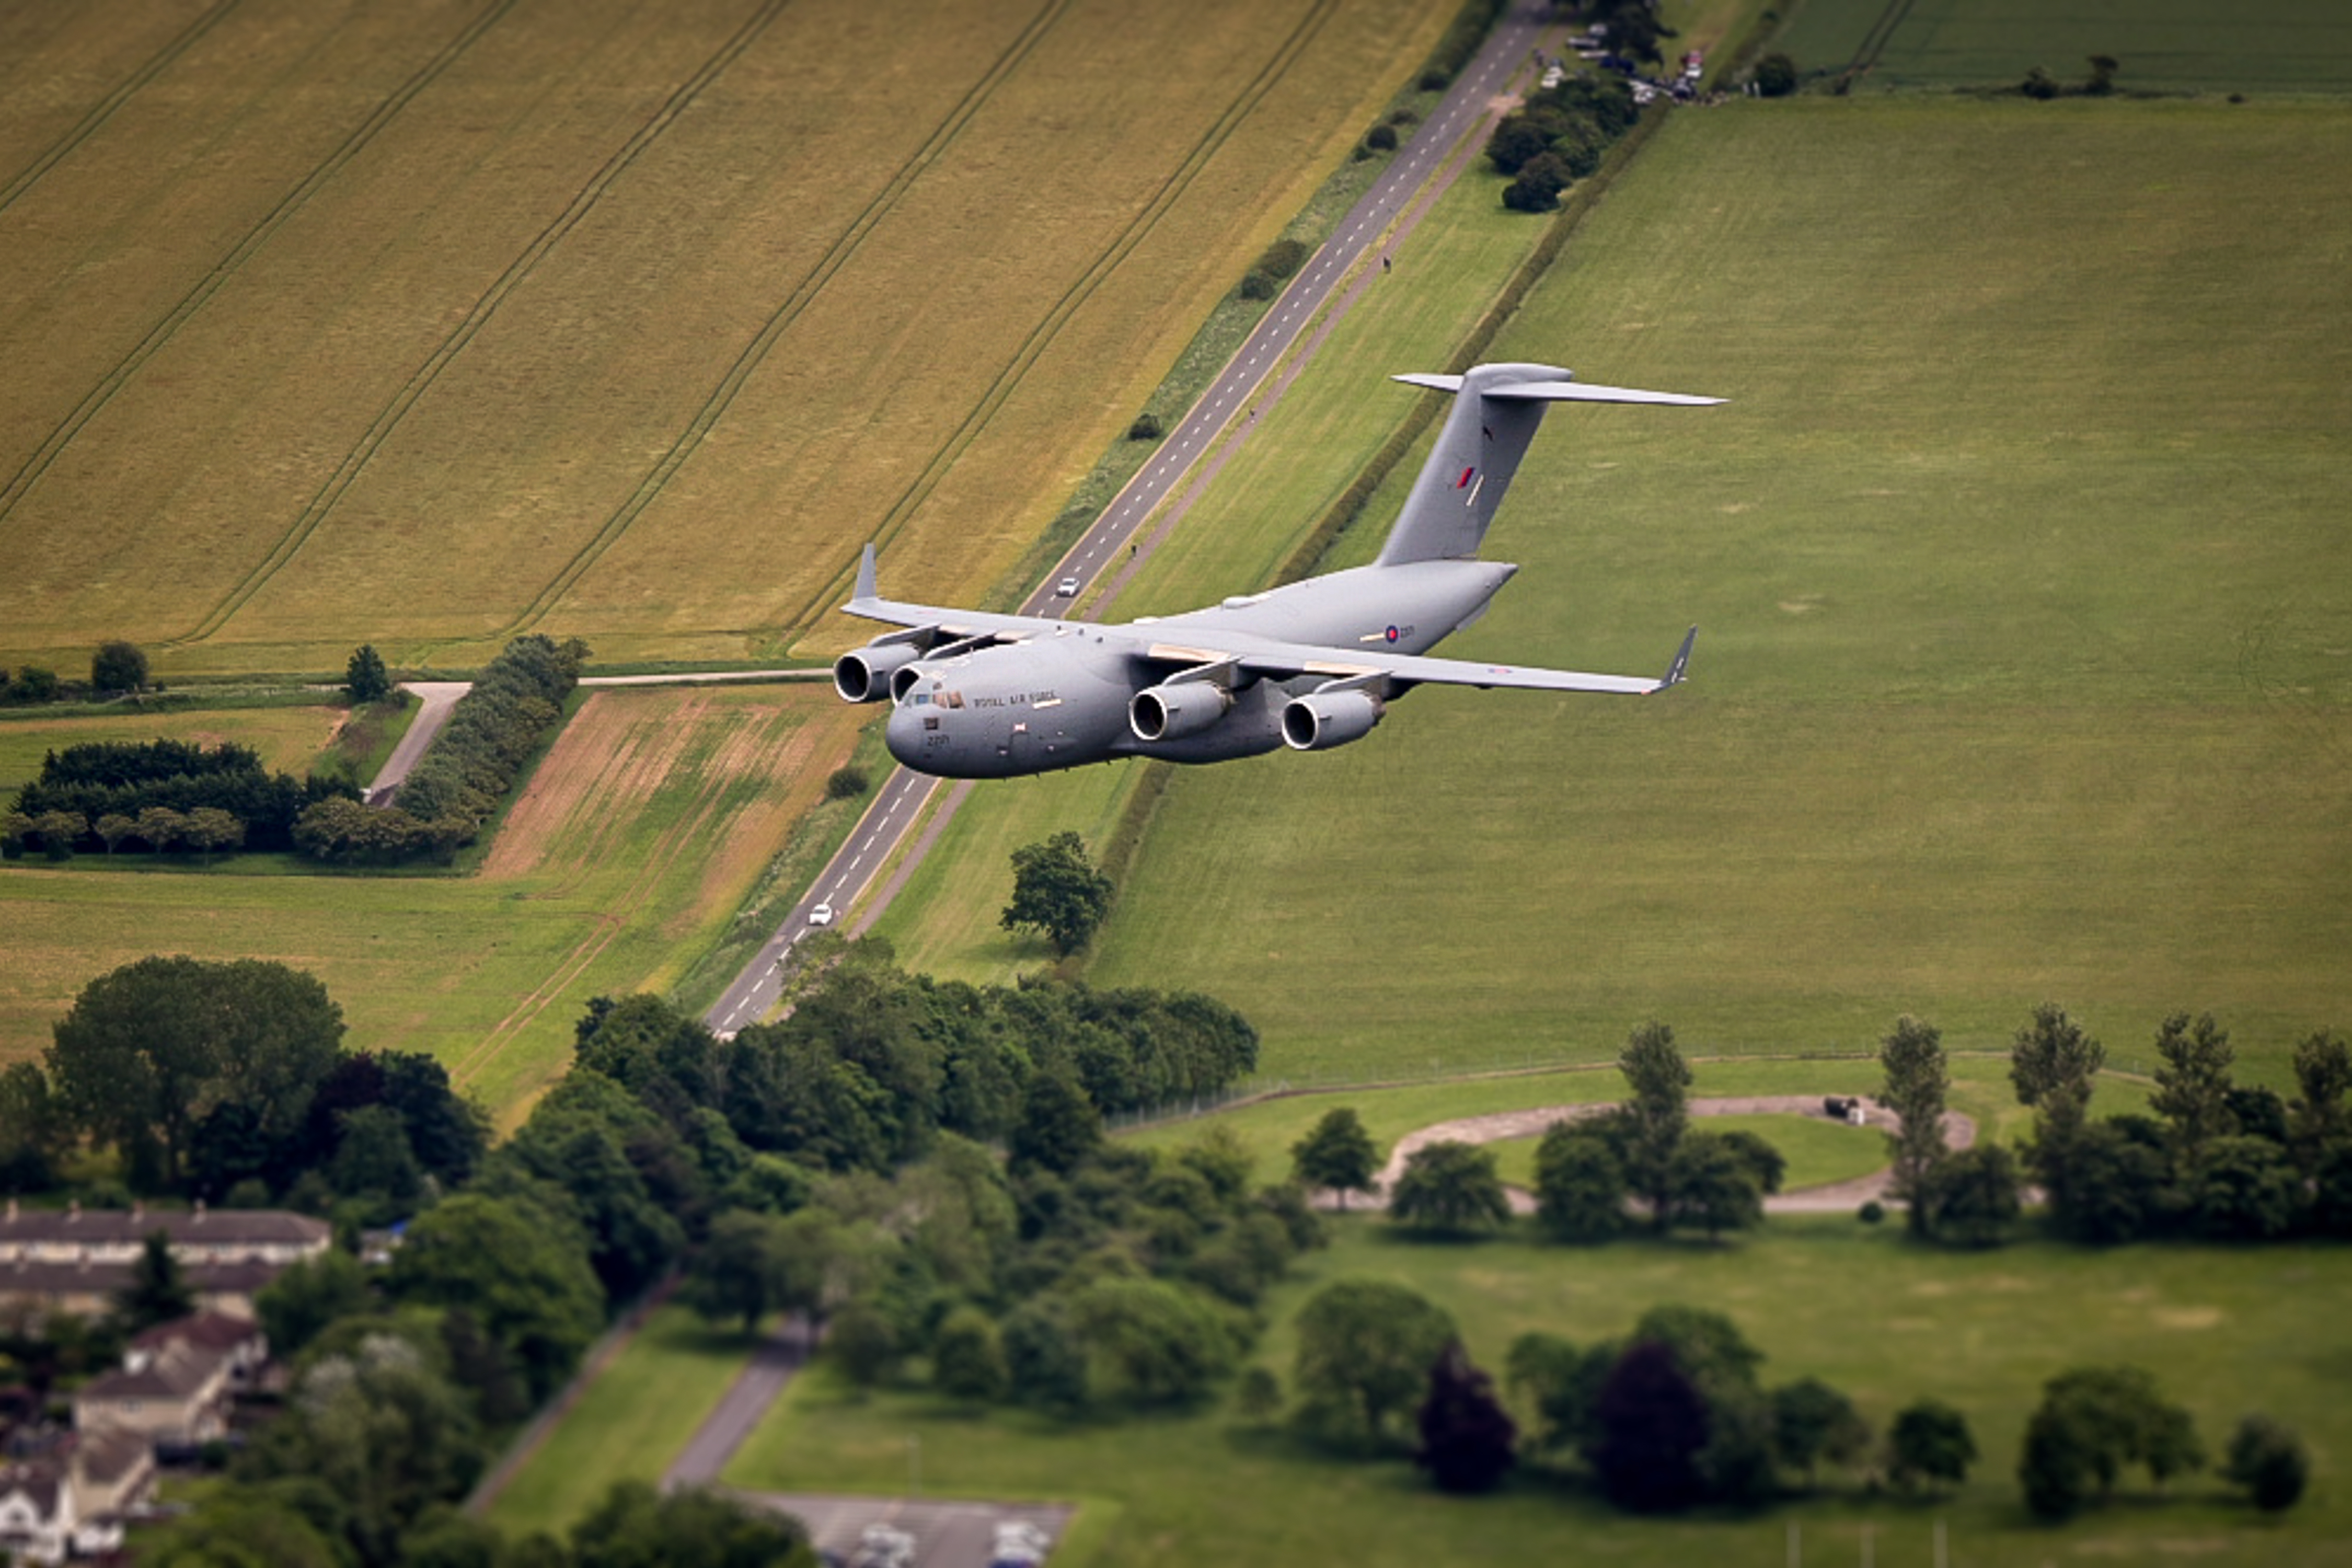 Image shows an RAF C-17 aircraft flying.